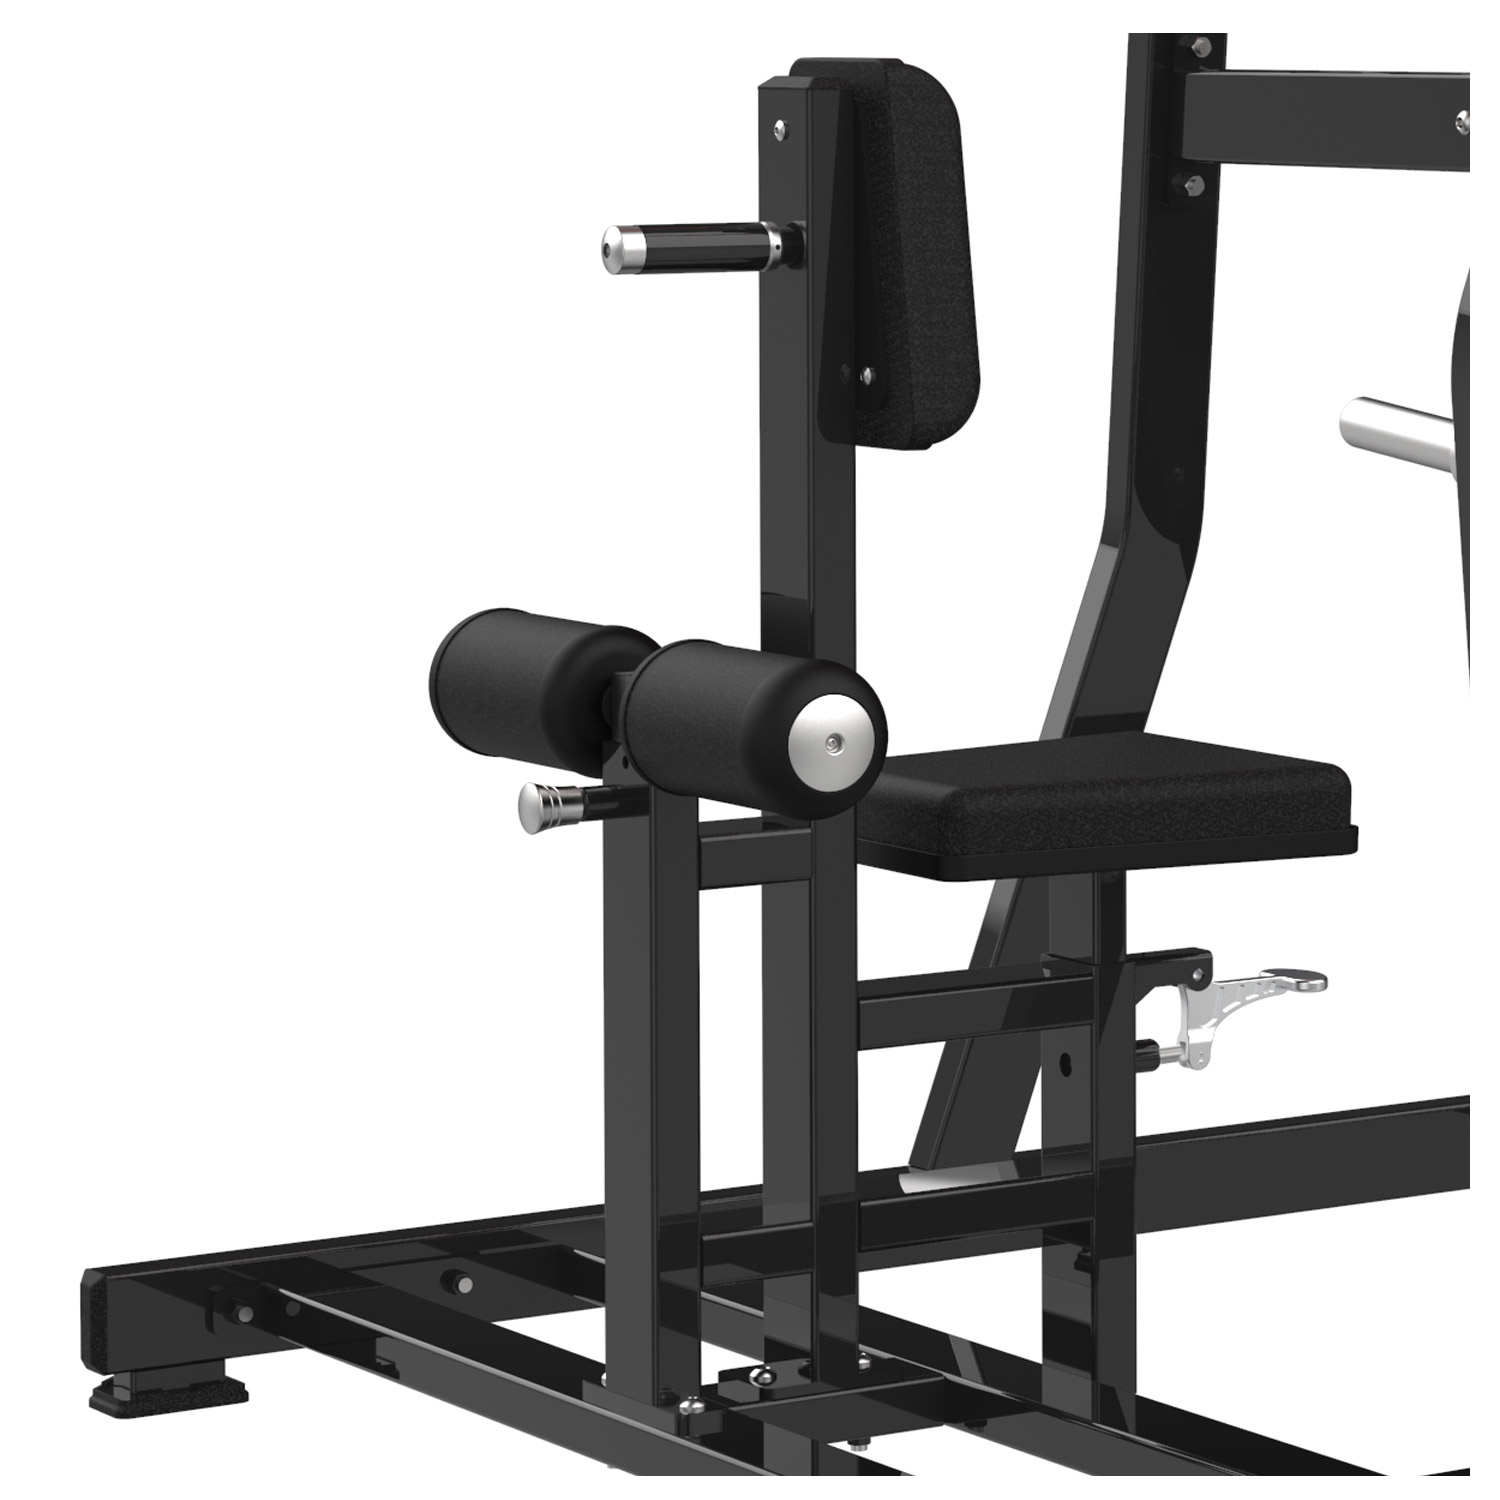 RS-1002 Iso-Lateral Chest/Back